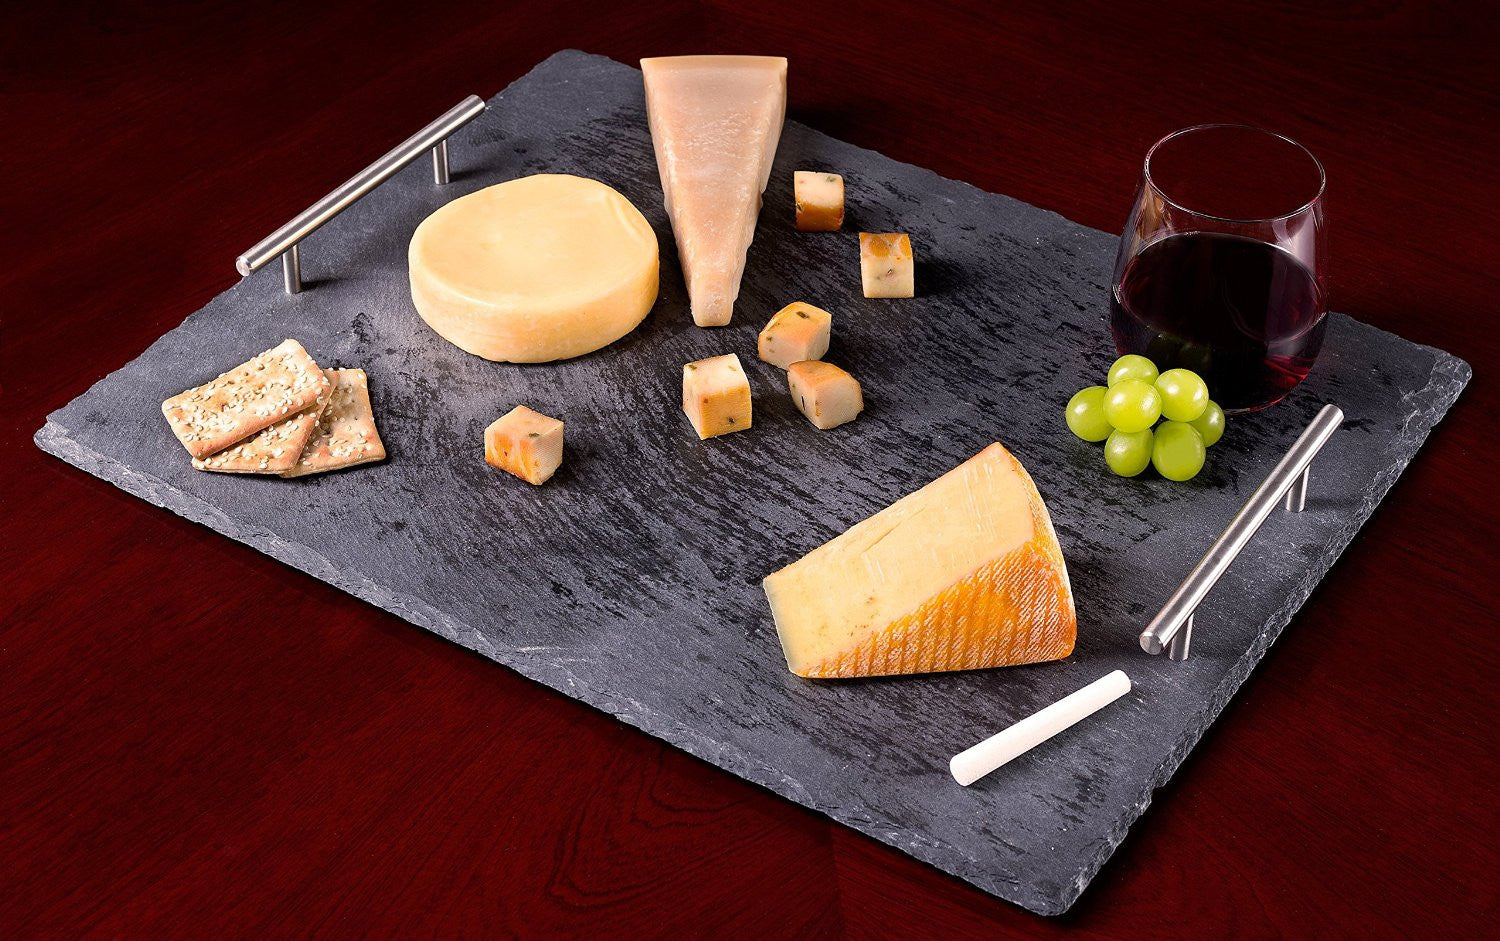 Slate Cheese Board Set with Handles,17.7'' x 13.7"